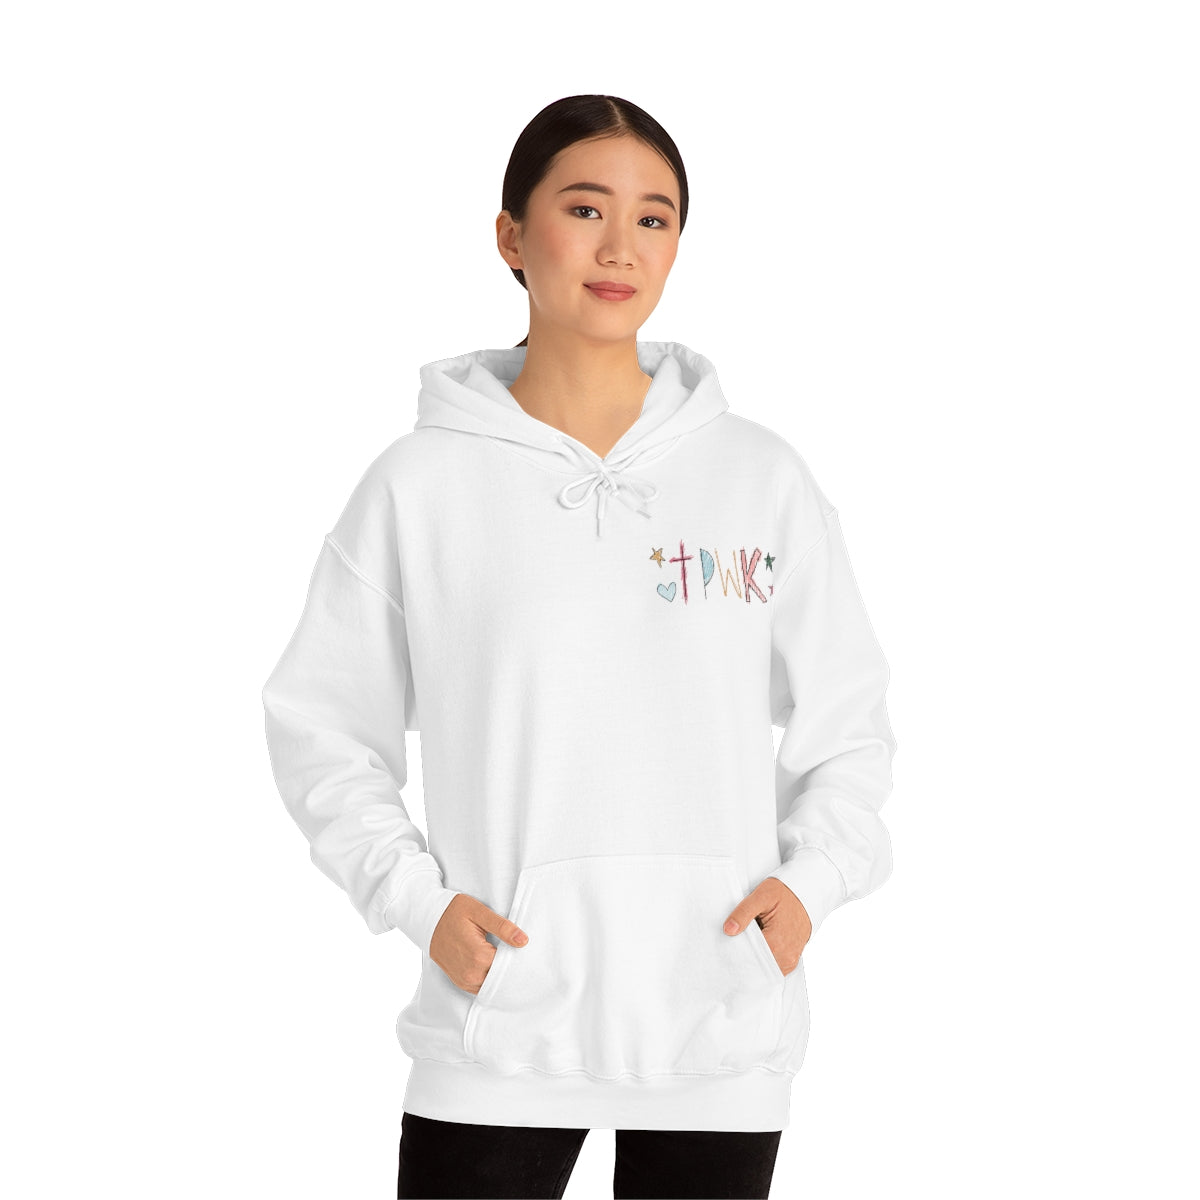 ...With a Sea View Scribble Hooded Sweatshirt